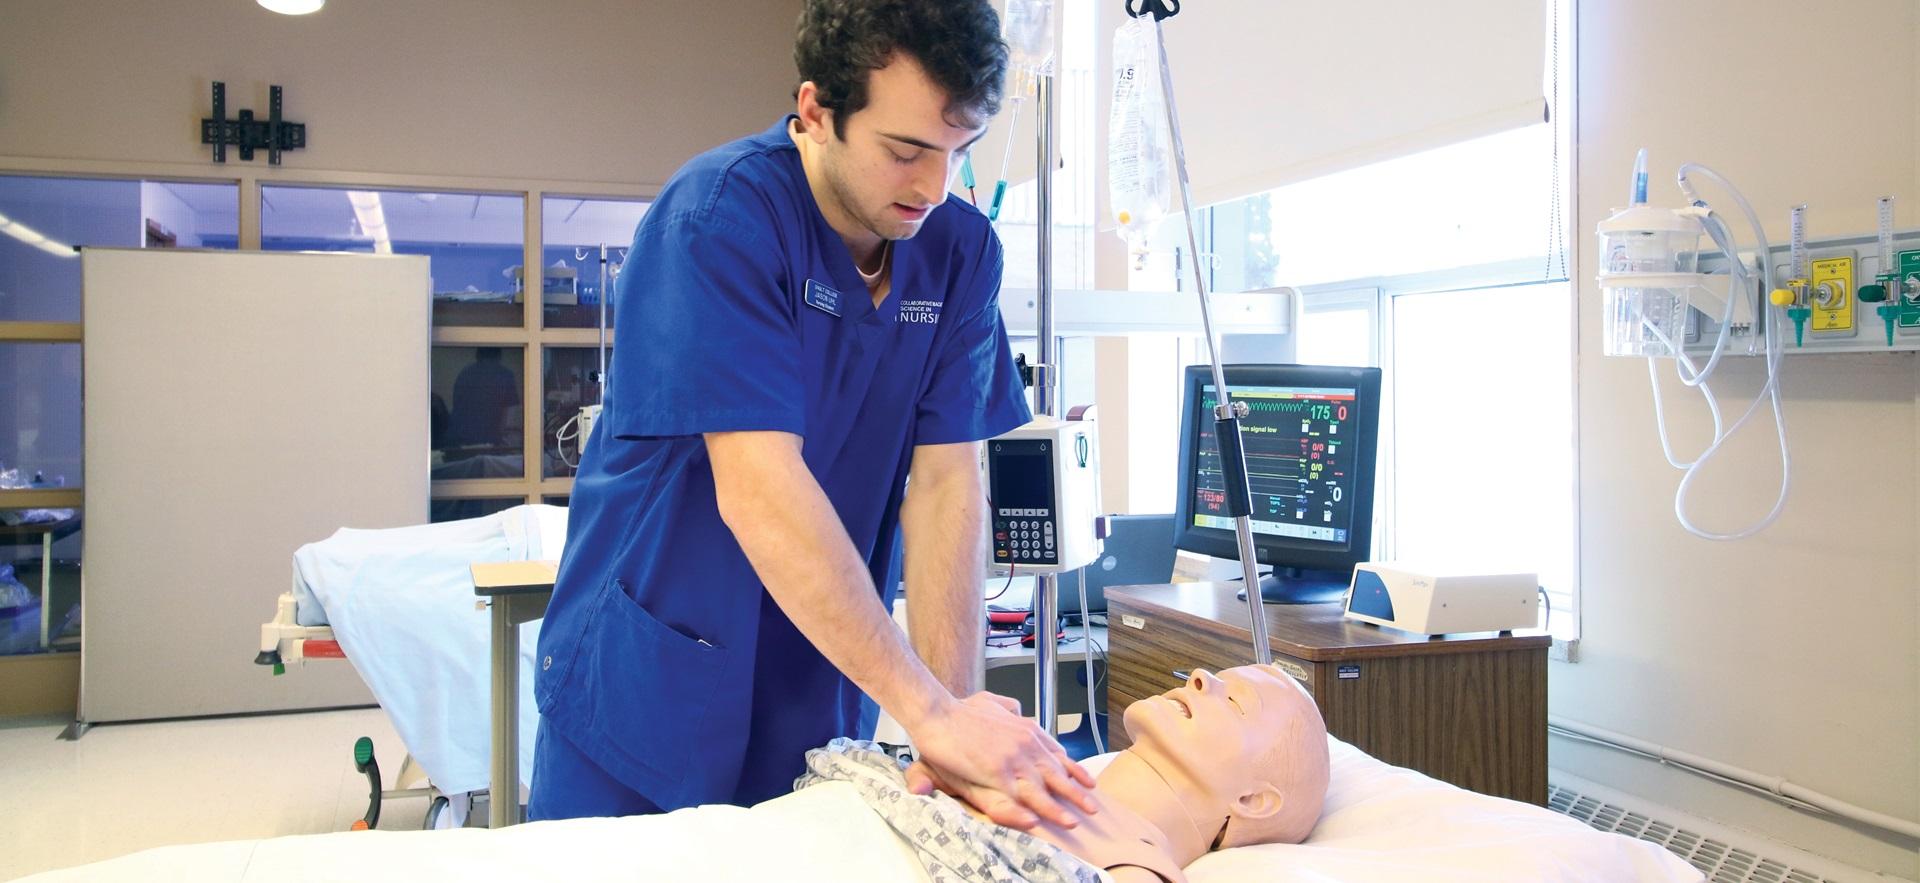 Nursing student performing chest compressions on simulation manikin